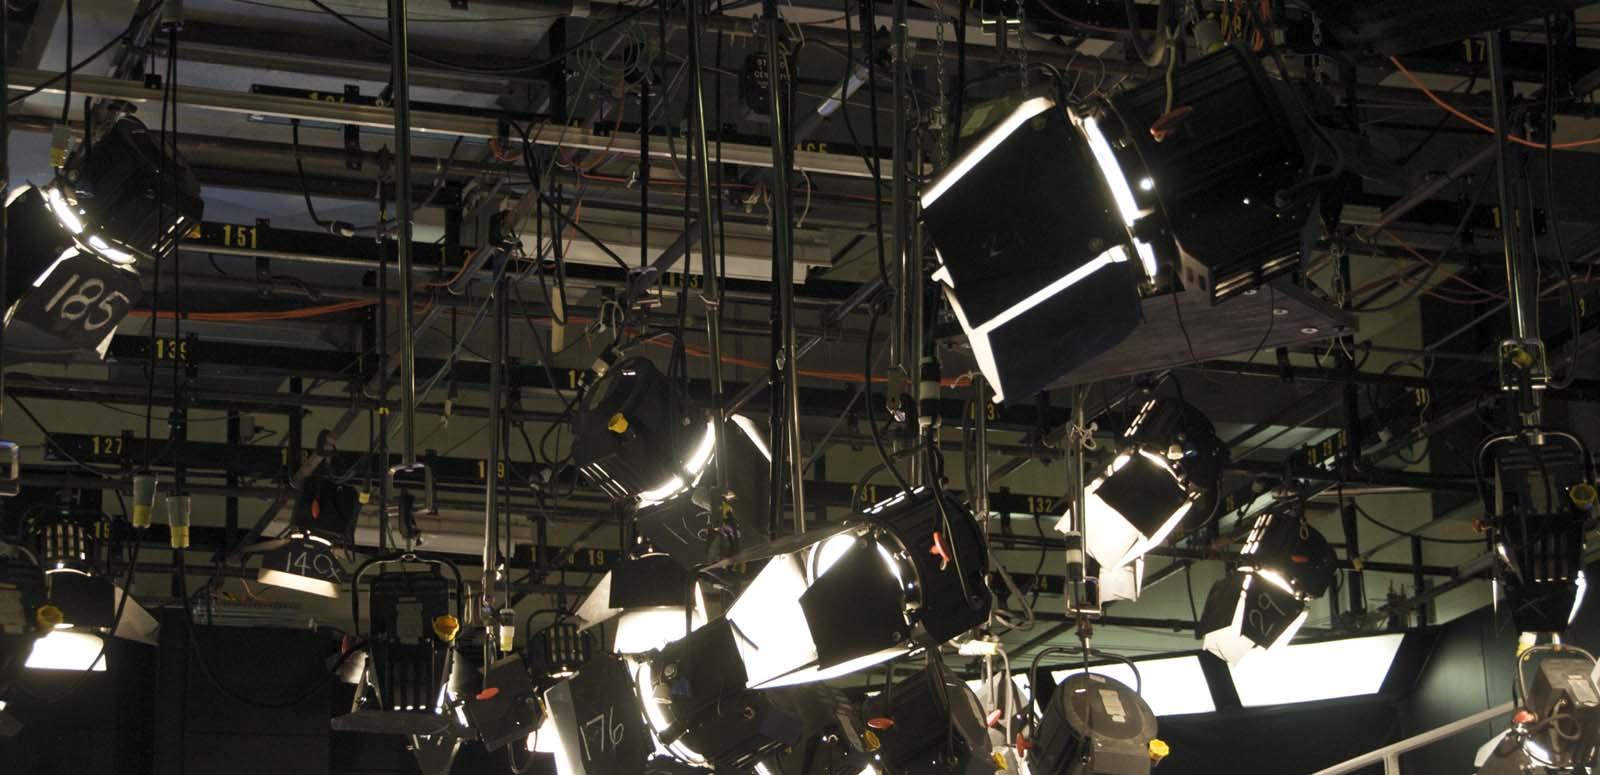 An array of studio lights suspended from the ceiling of a TV studio